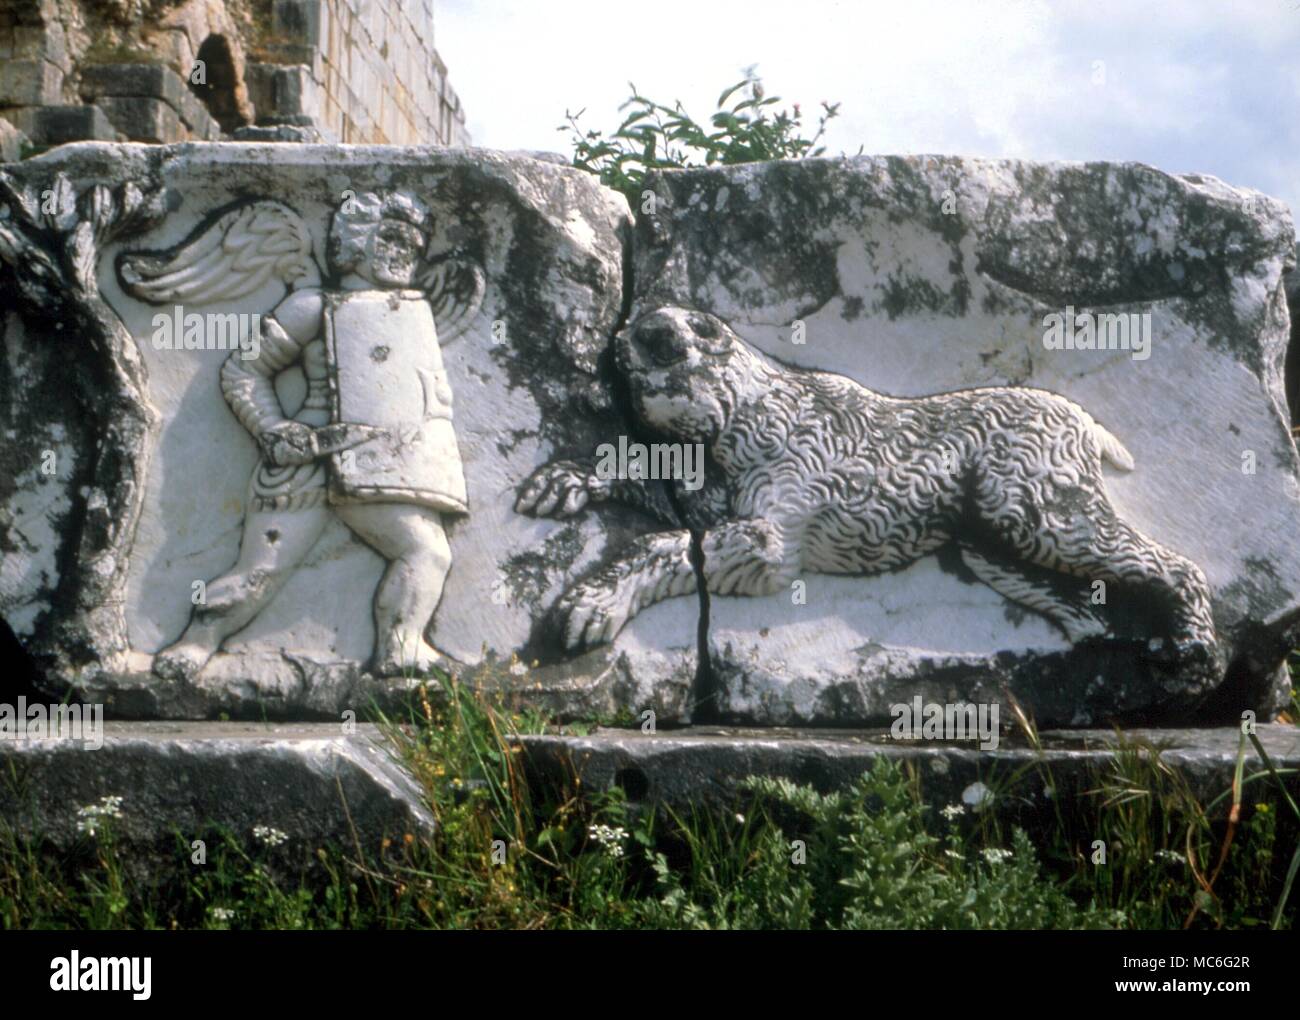 ANIMALS - Bear attacking a gladiator in the Roman arena. bas relief on fallen masonry in front of the Roman theatre at Miletus, Turkey Stock Photo